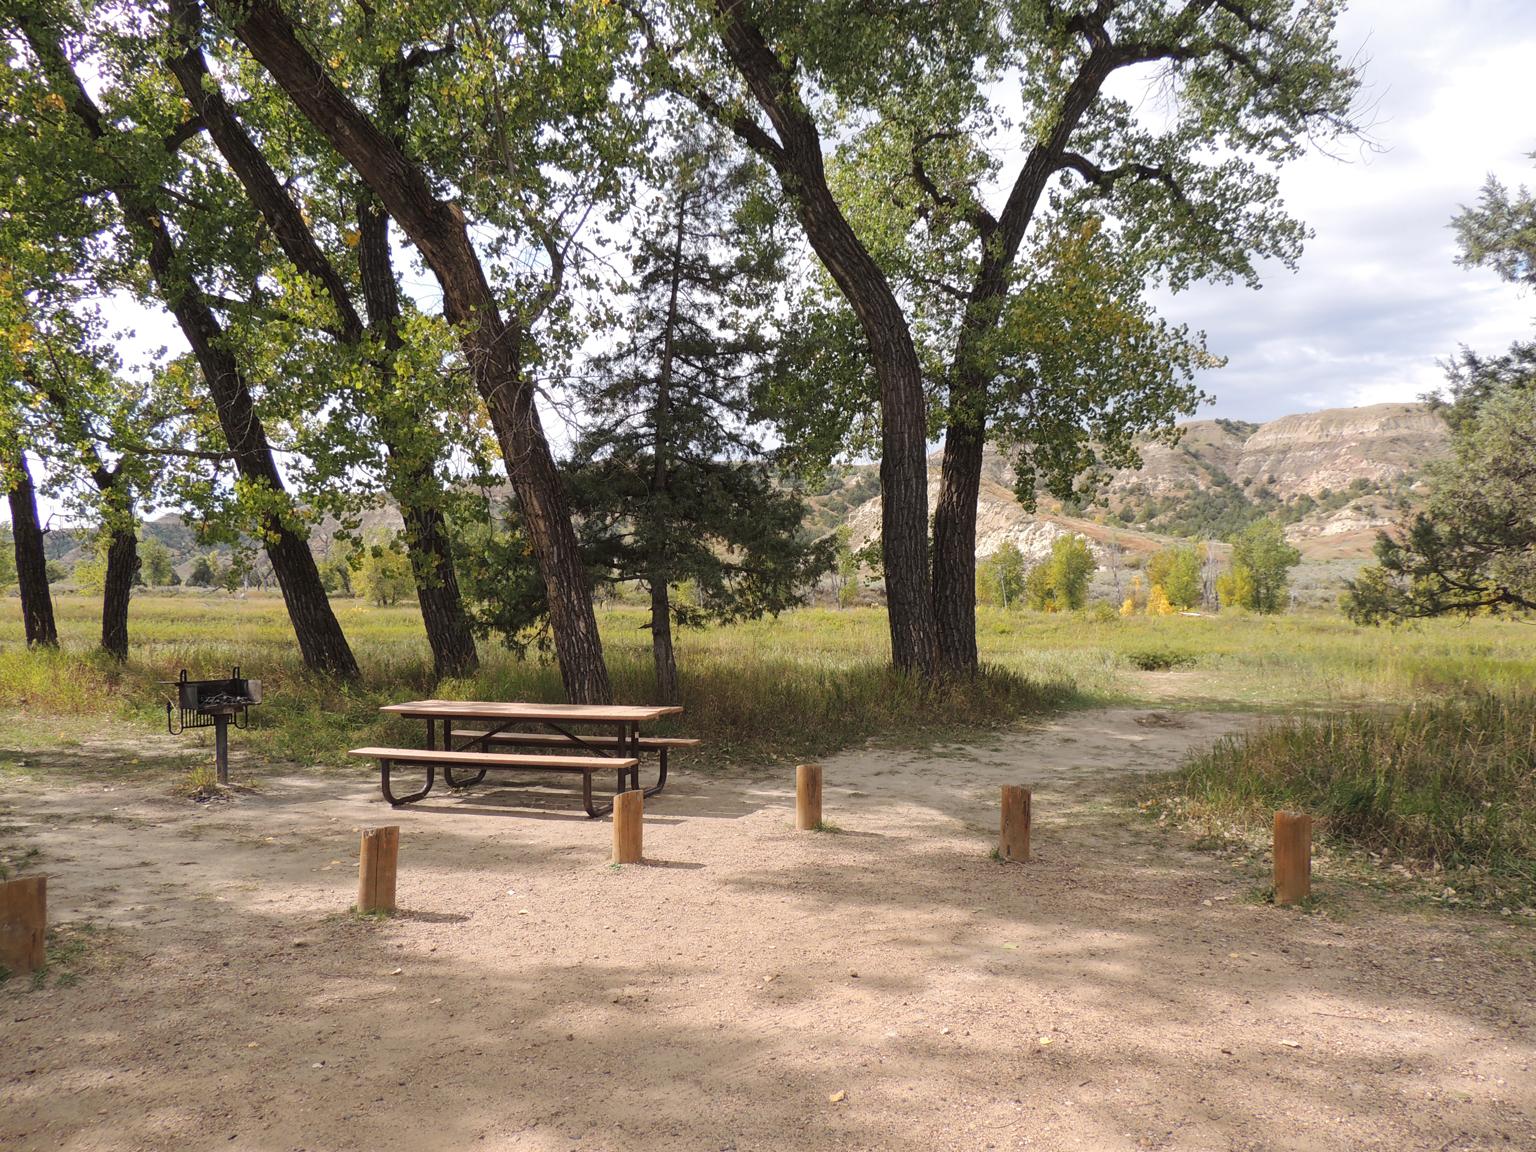 A campsite beneath cottonwood trees with an open field and buttes in the distance.